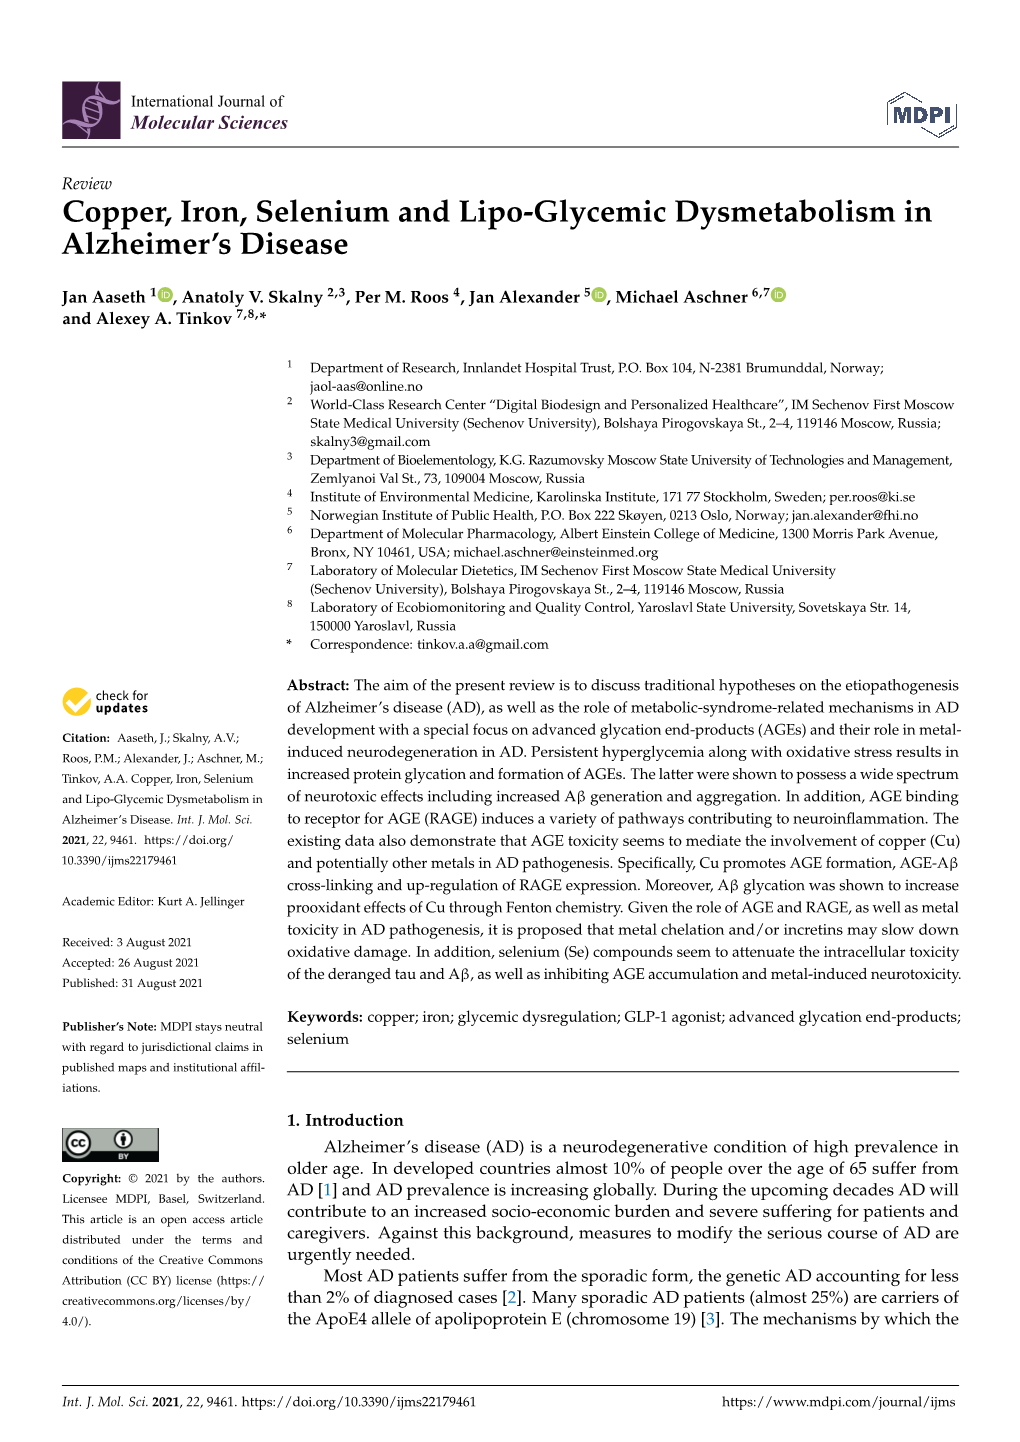 Copper, Iron, Selenium and Lipo-Glycemic Dysmetabolism in Alzheimer’S Disease